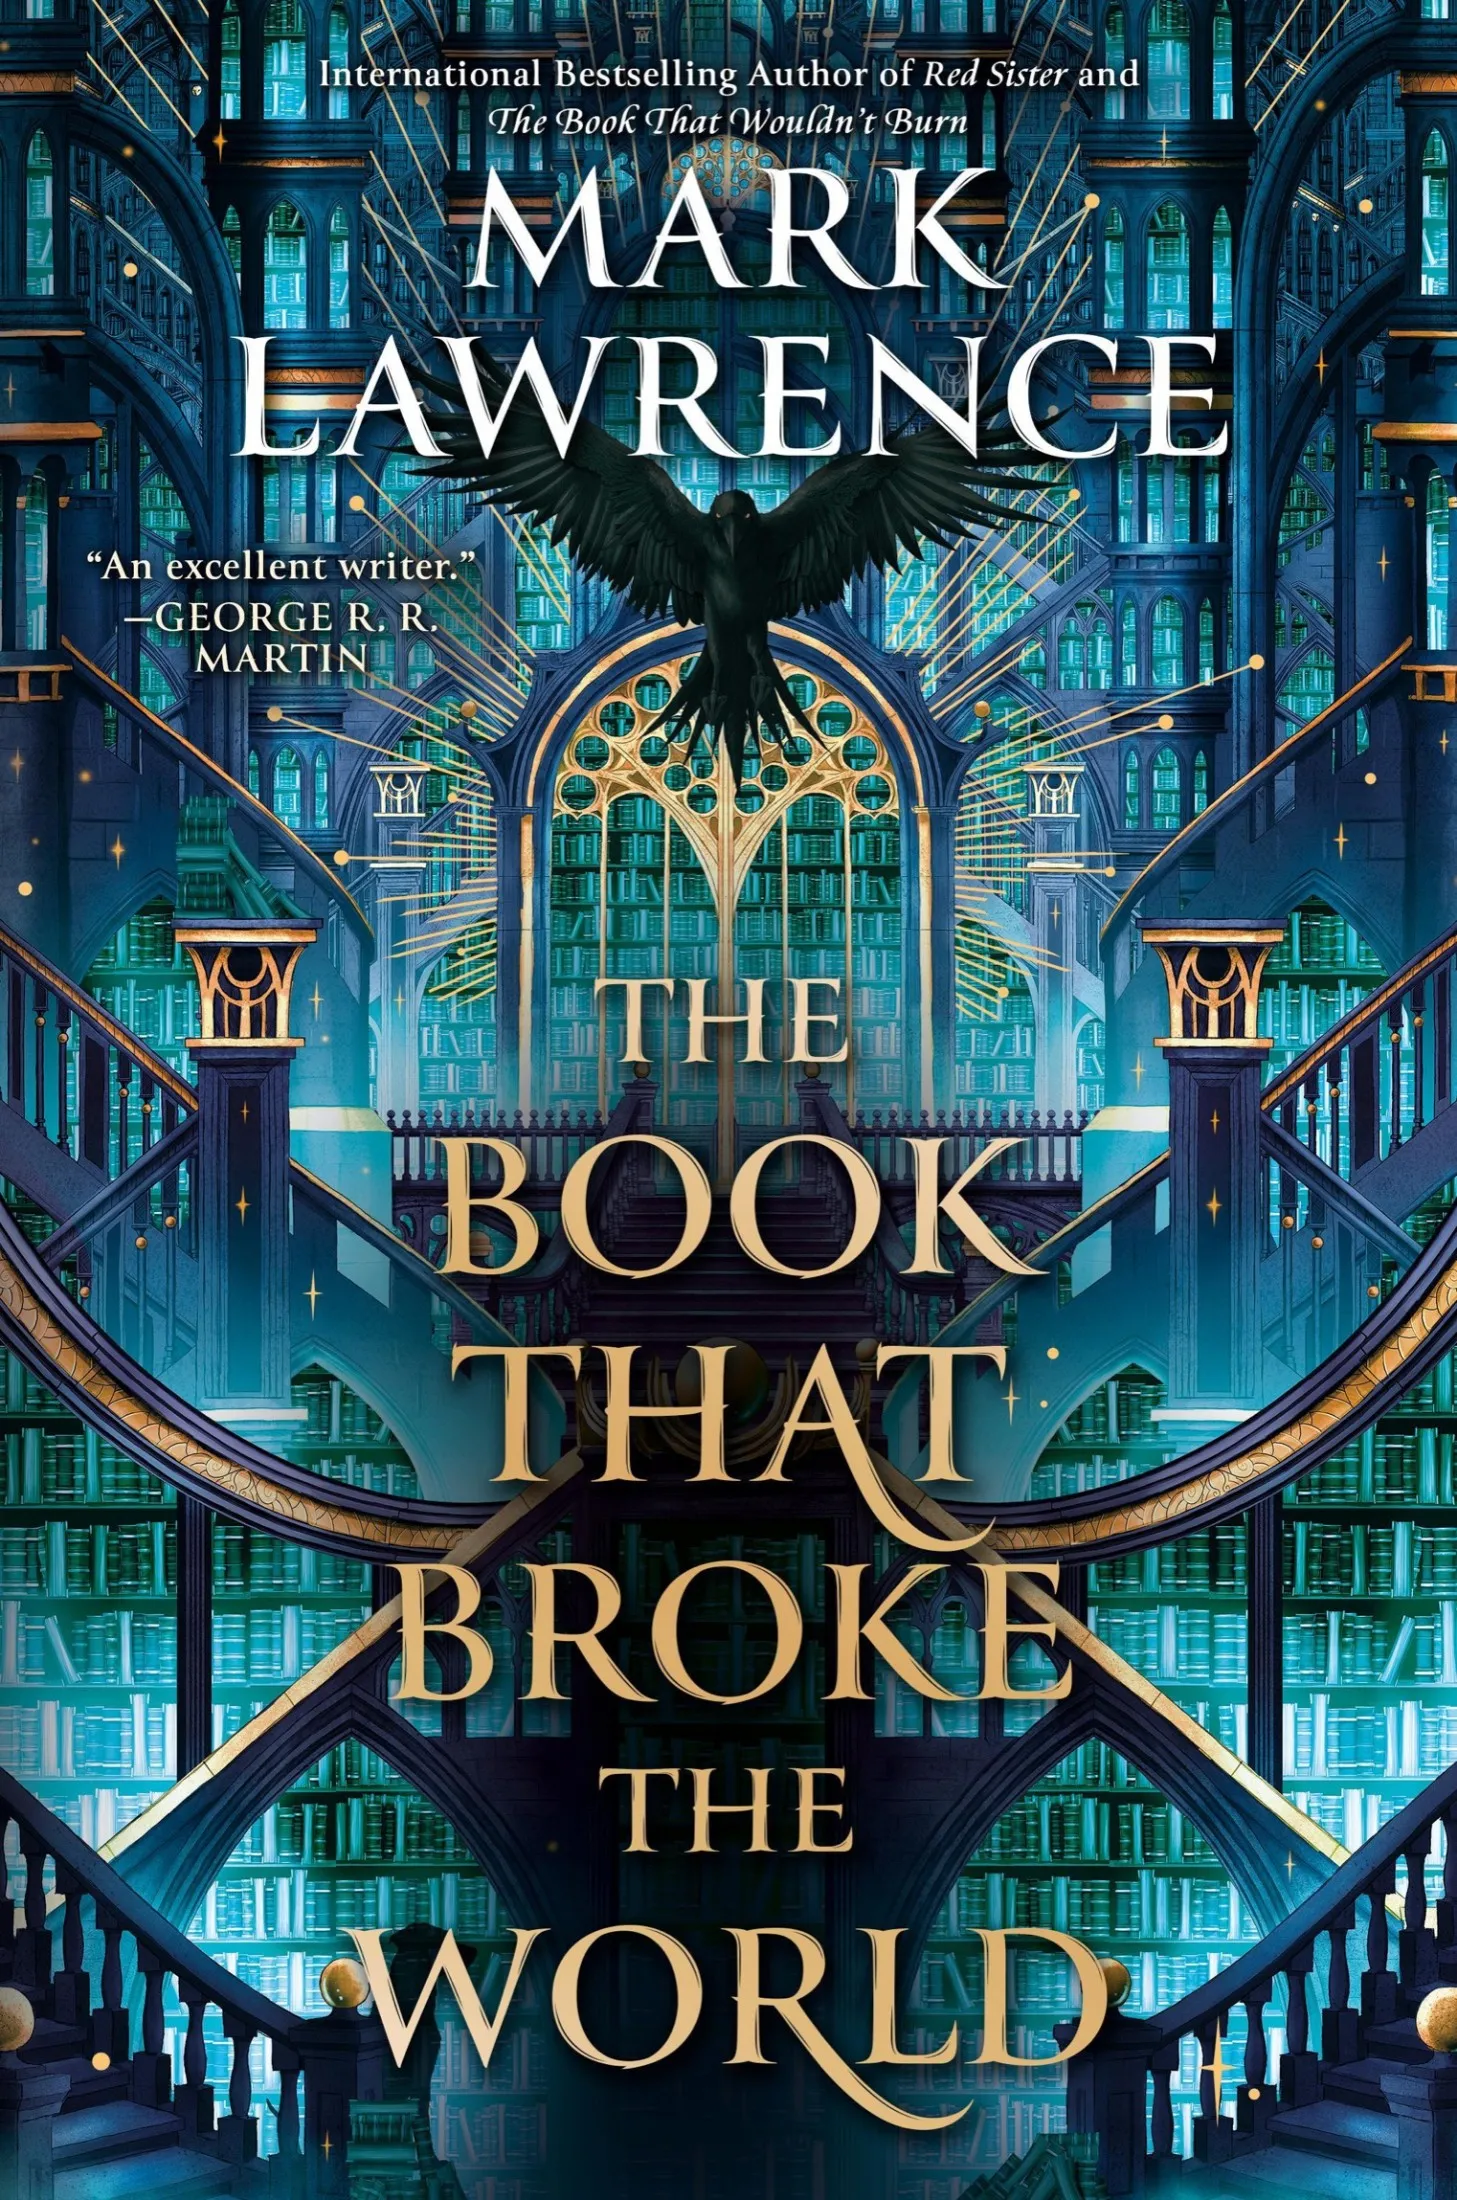 The Book That Broke the World (The Library Trilogy #2)